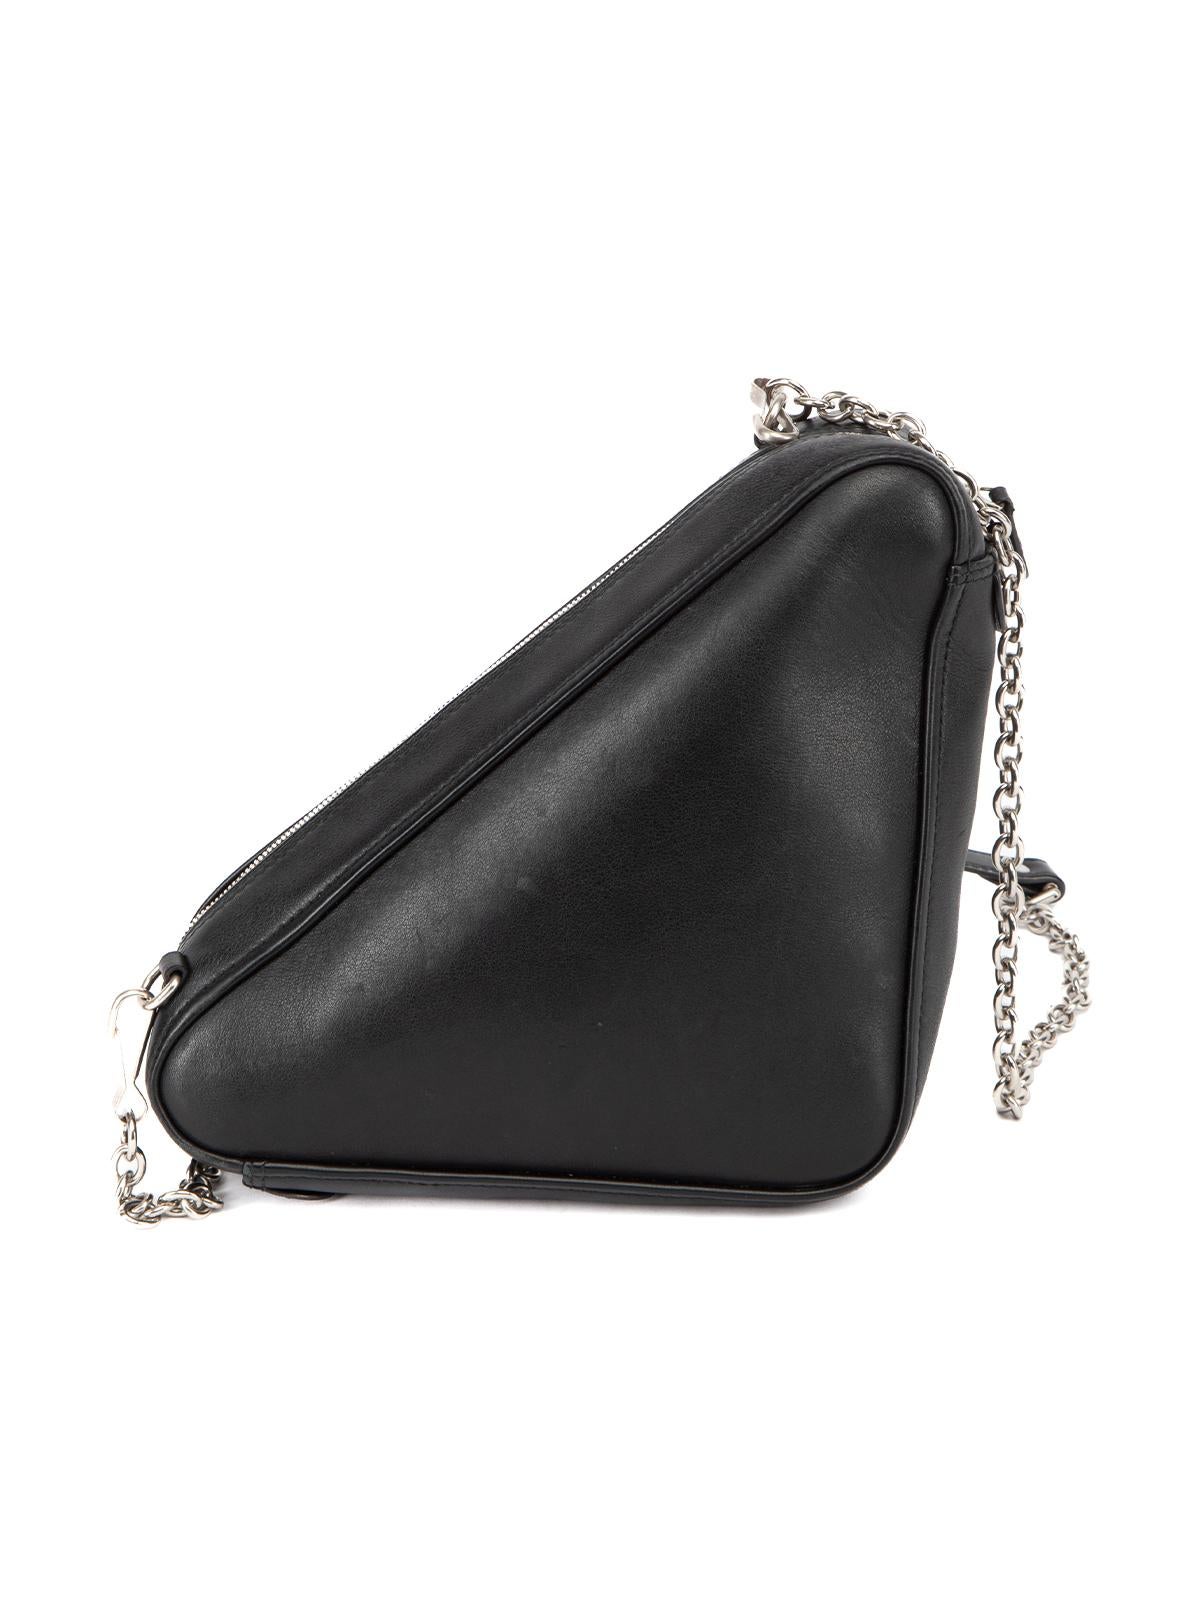 CONDITION is Very good. Minimal wear to bag is evident. Minimal wear to bag interior and silver hardware. There is also some light scuffing and creasing to the leather exterior on this used Balenciaga designer resale item.   Details  Black  Leather 